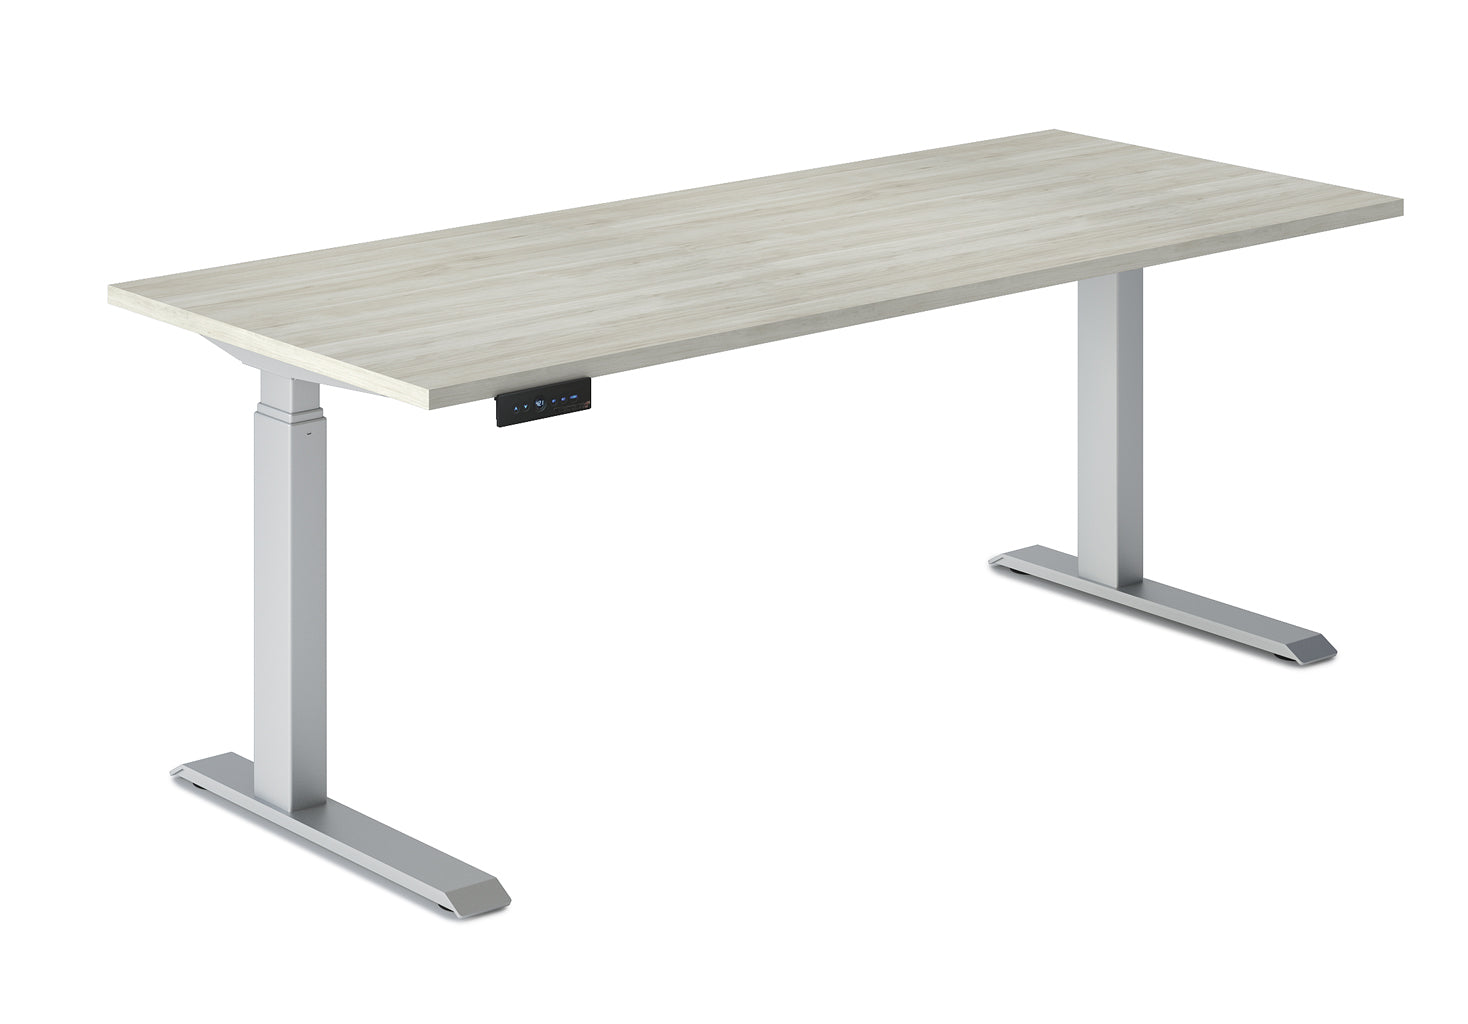 Sit stand desk with Winter Wood laminate top. Size 60 x 30 inches.